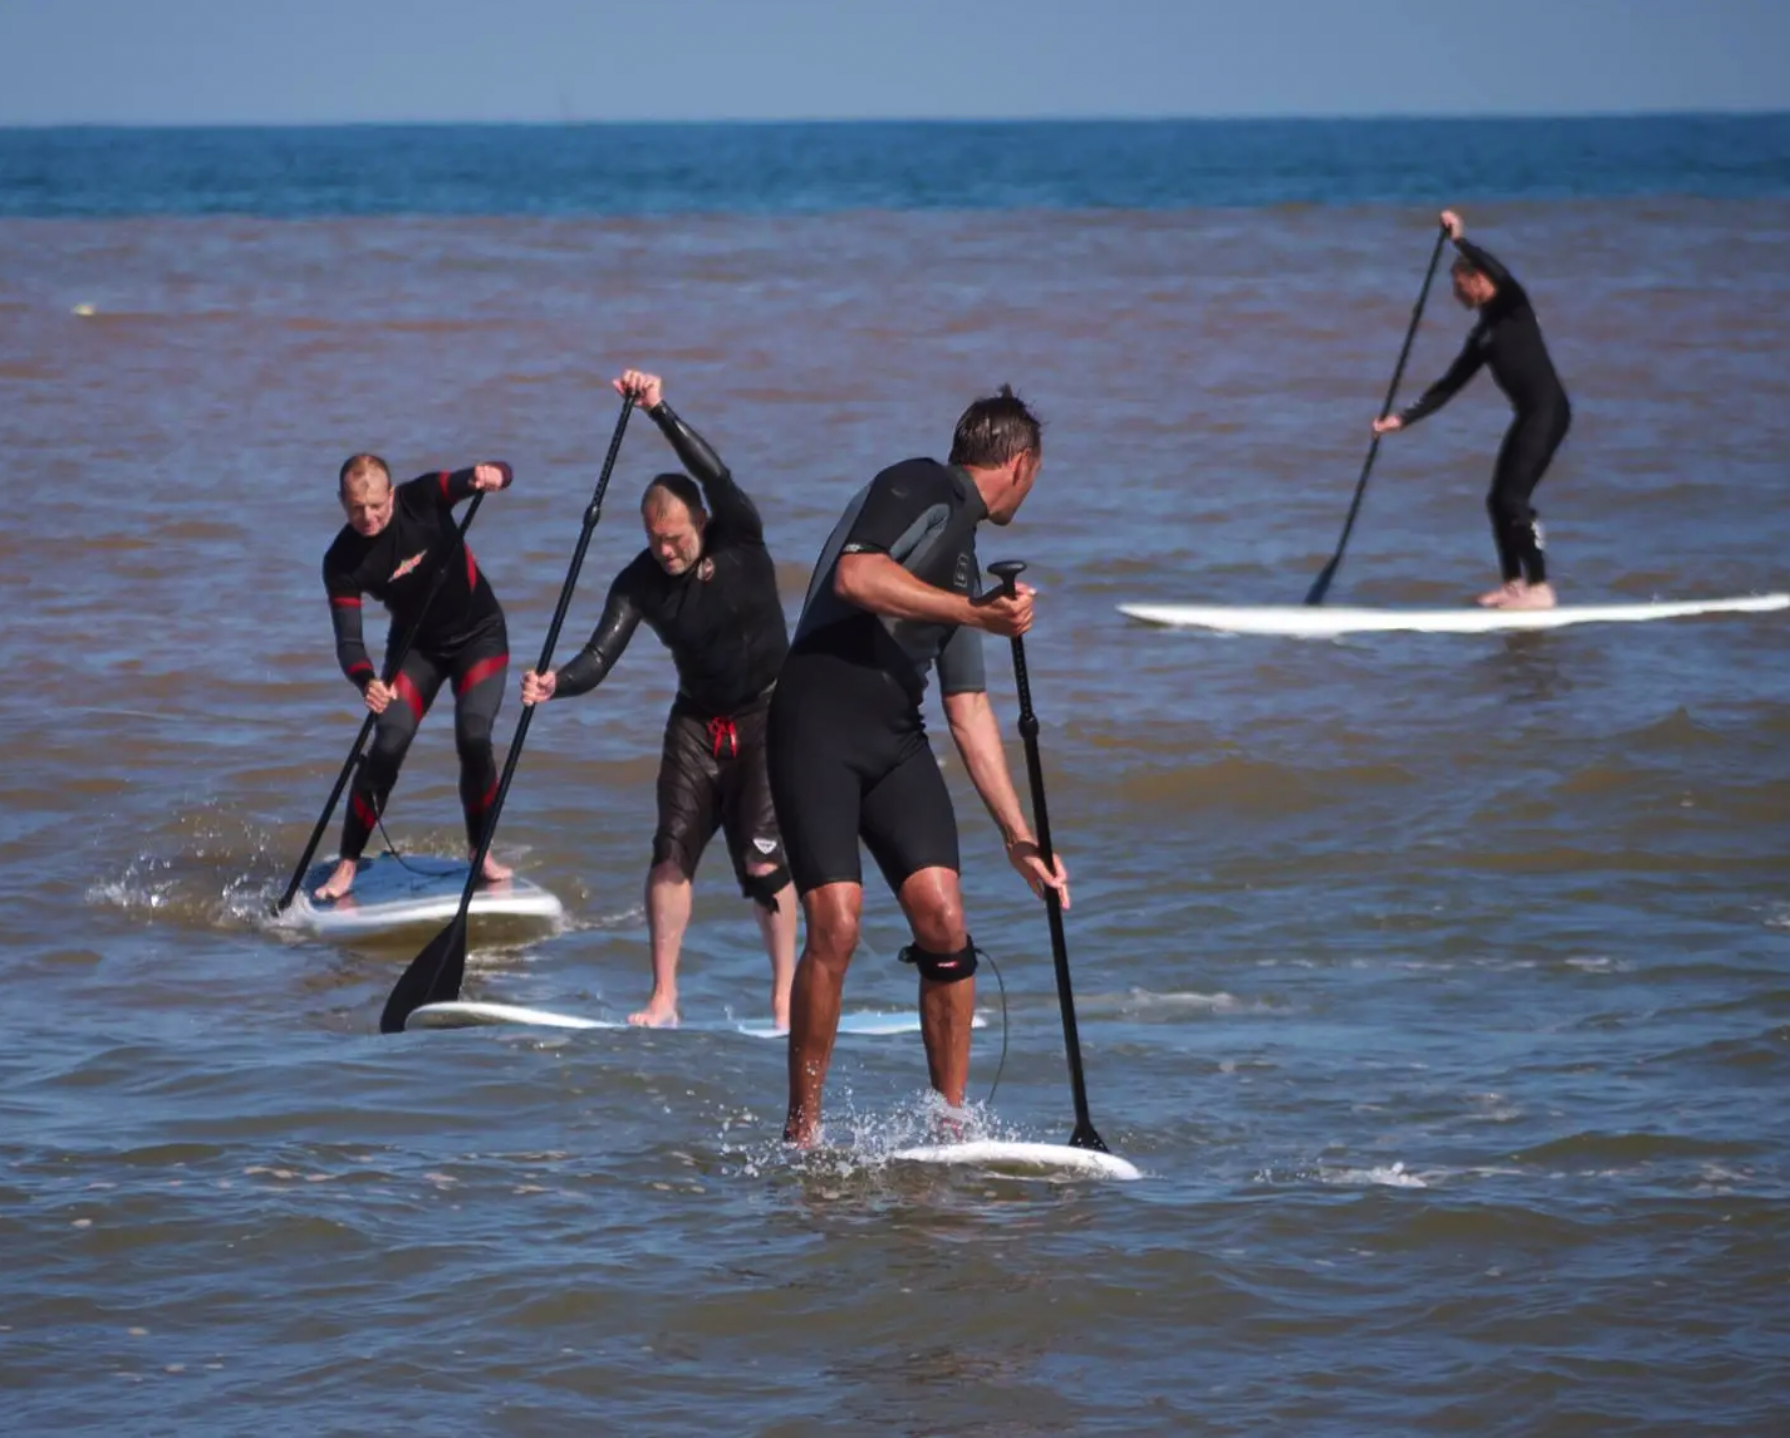 South farm holiday cottages paddle boarding